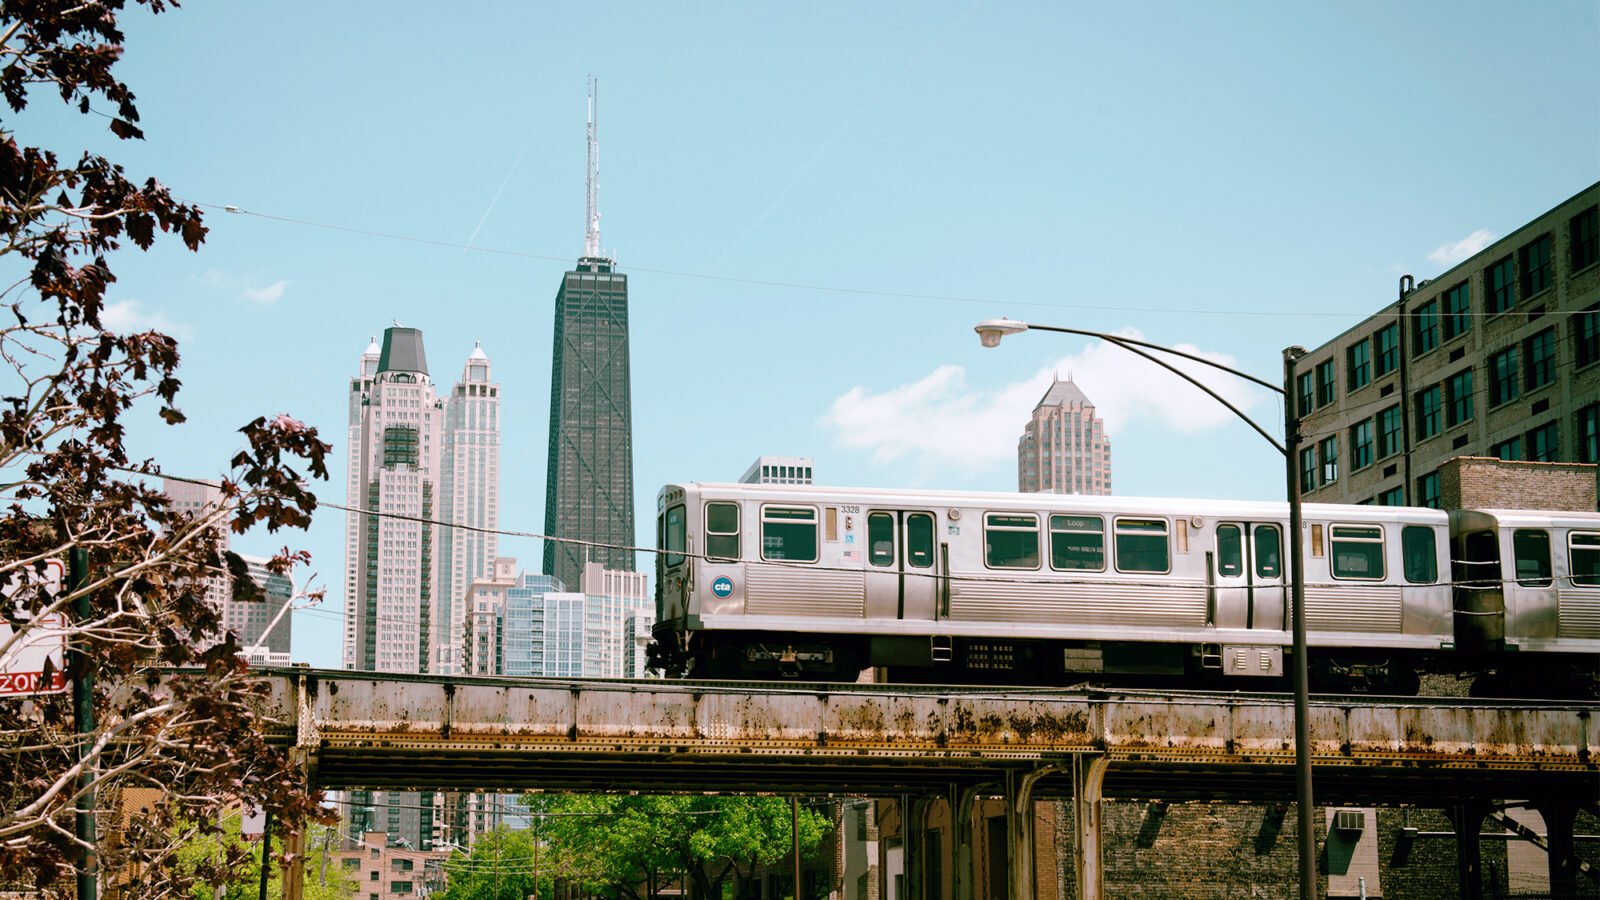 the cta train makes music of its own, squealing down the brown line